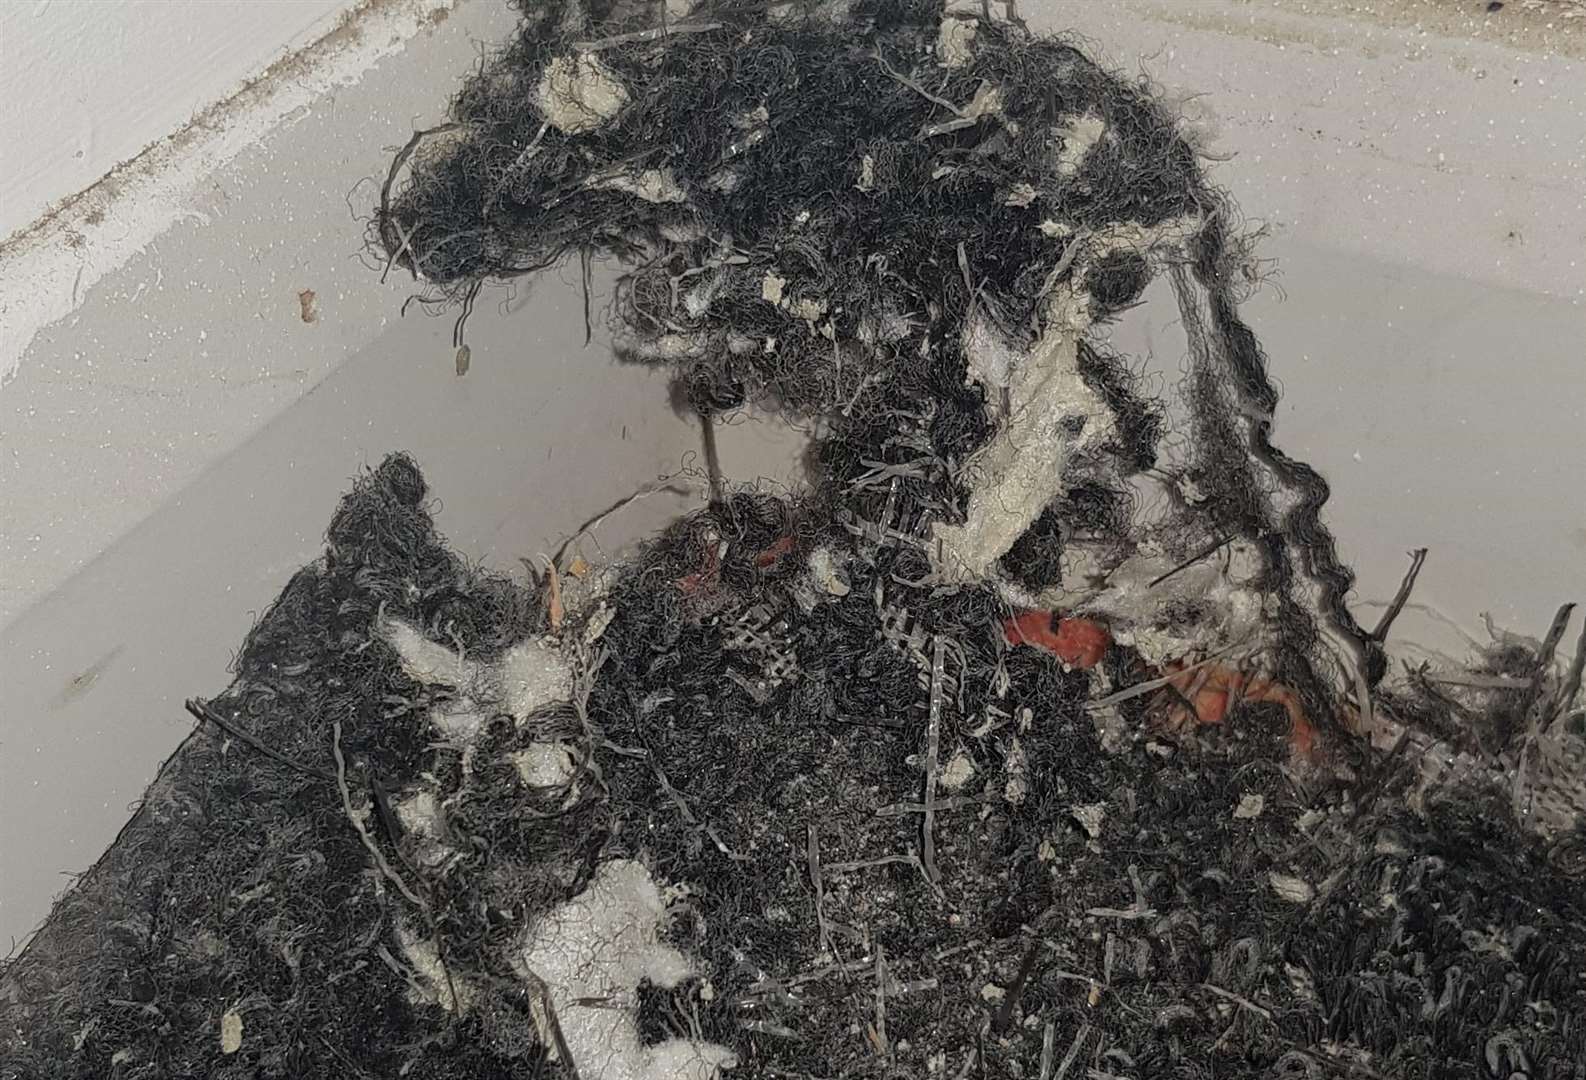 Carpets have been chewed up (5226545)